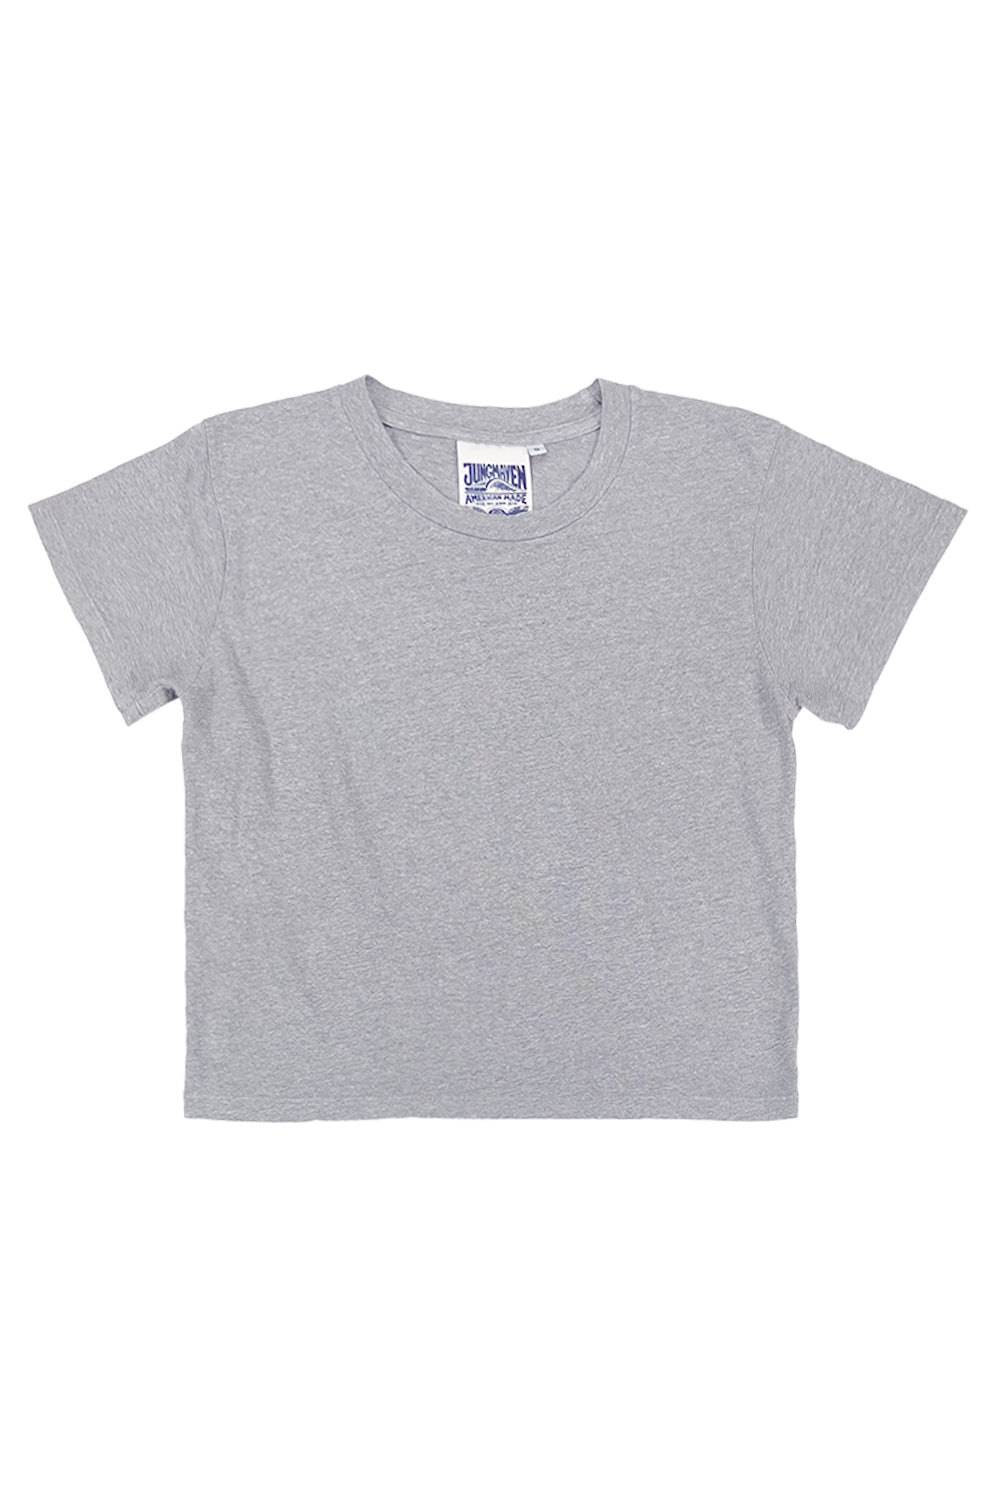 Heathered Cropped Lorel Tee | Jungmaven Hemp Clothing & Accessories / Color: Athletic Gray